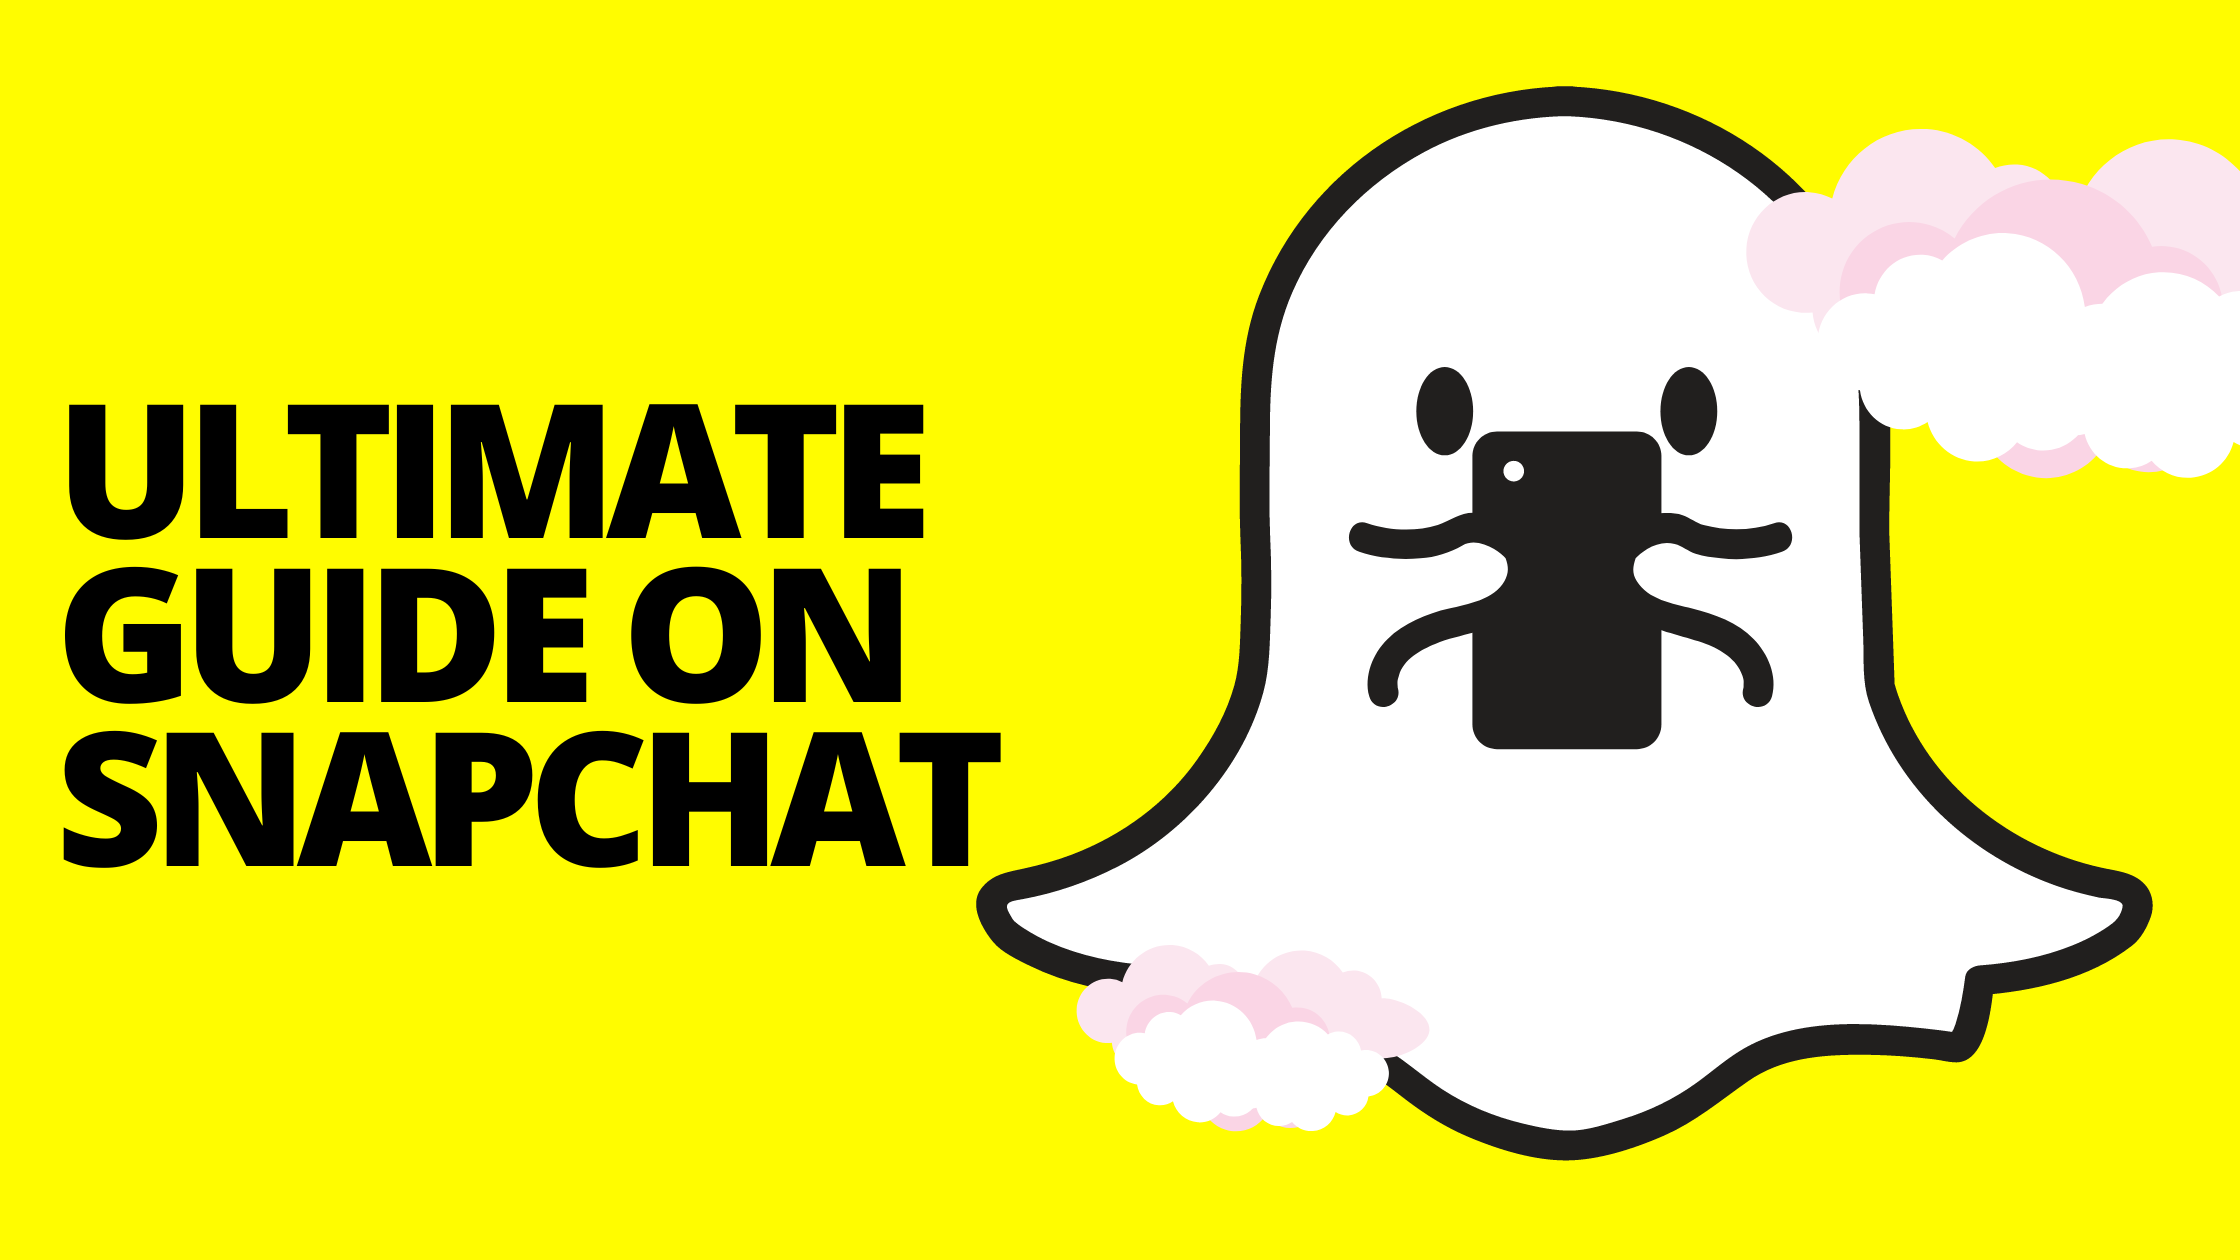 Remote.tools shares ultimate guide on how to use Snapchat for personal and business related work